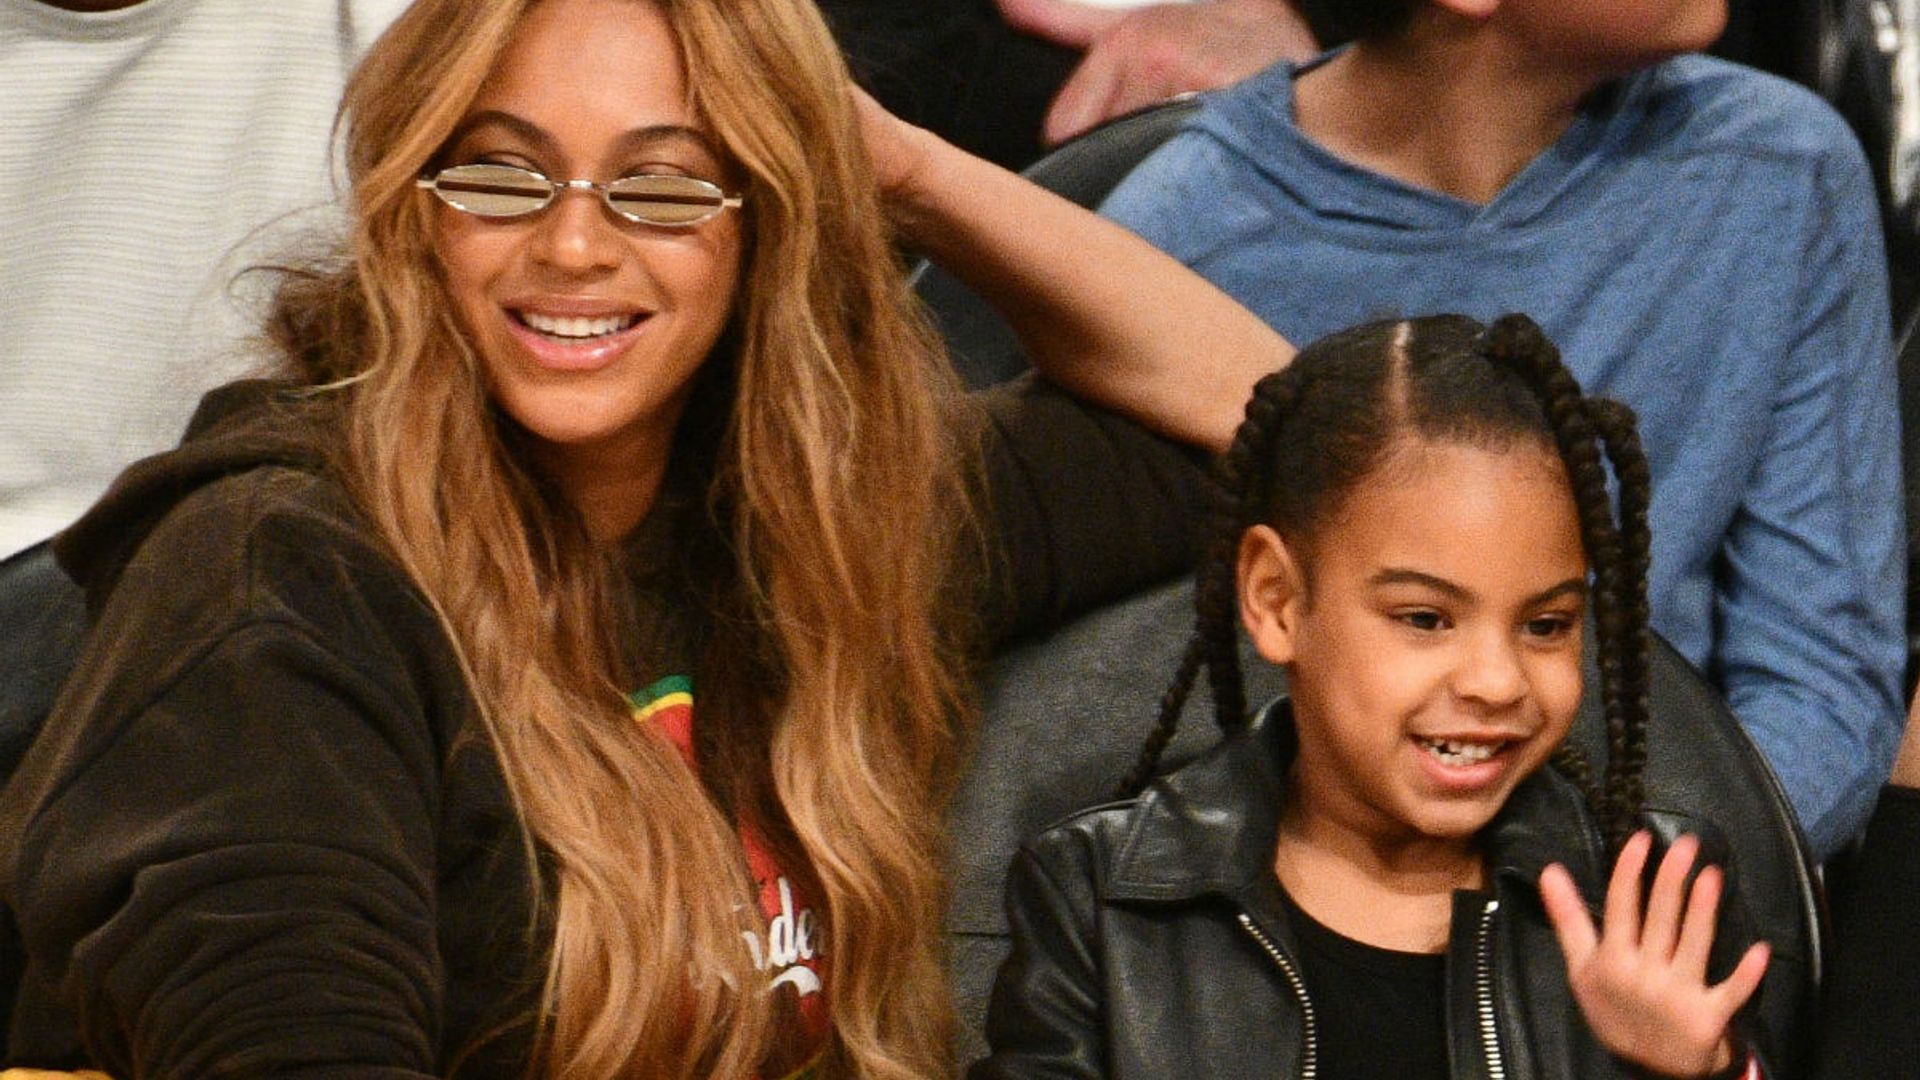 Beyonce's Daughter Blue Ivy's Hair Pulled by Fan During Concert Backlash - wide 7